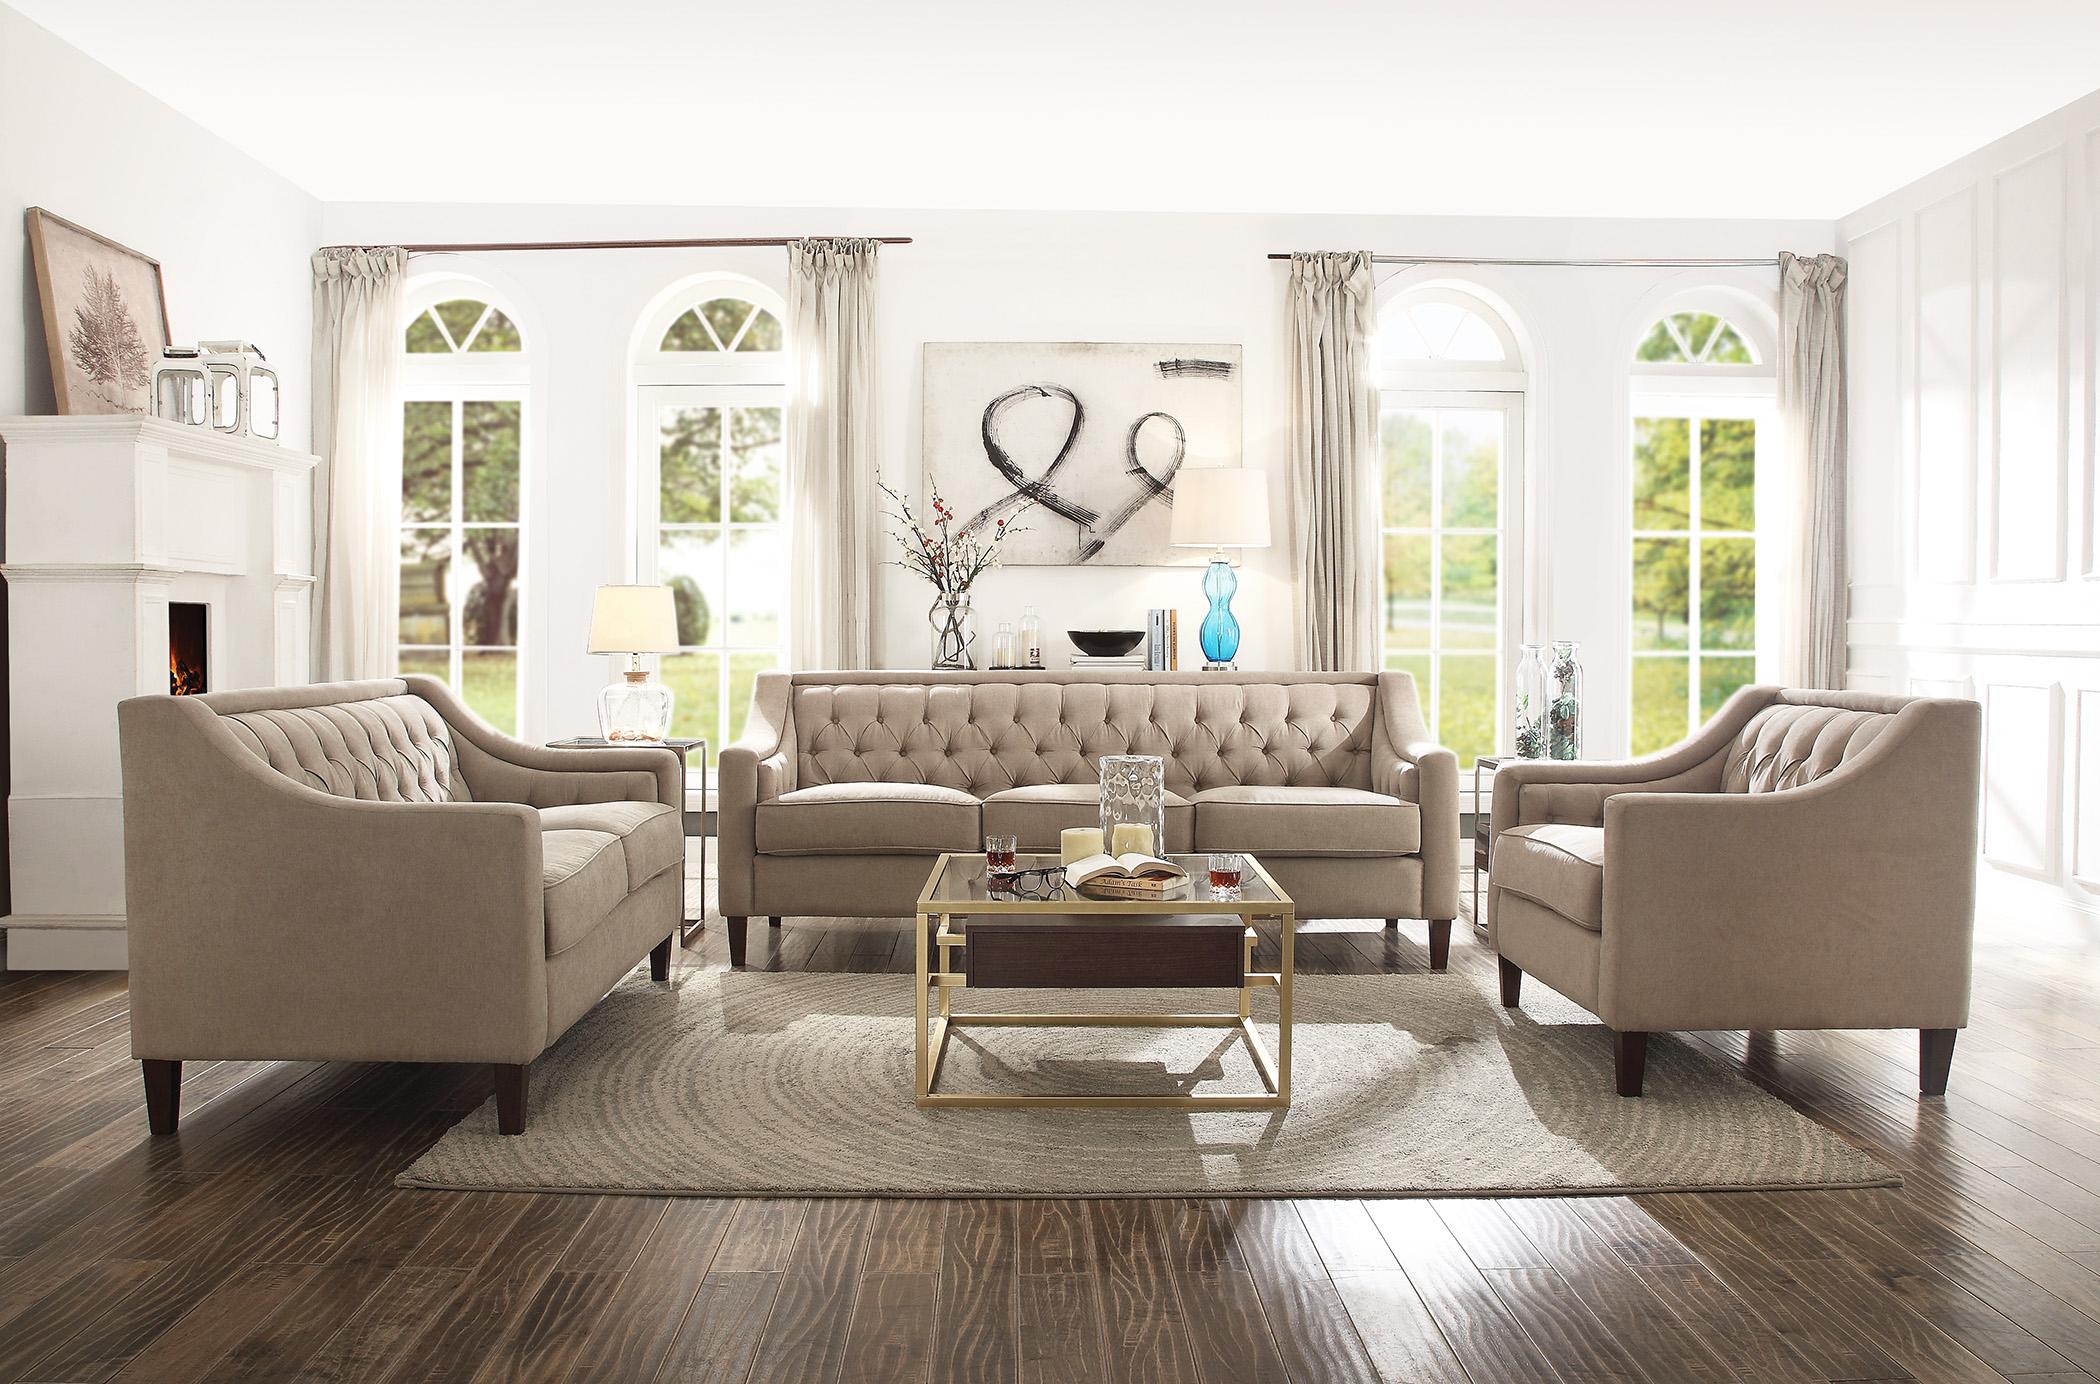 Vintage, Transitional Sofa Loveseat Chair Suzanne-54010 Suzanne-54010-Set-3 in Beige Fabric